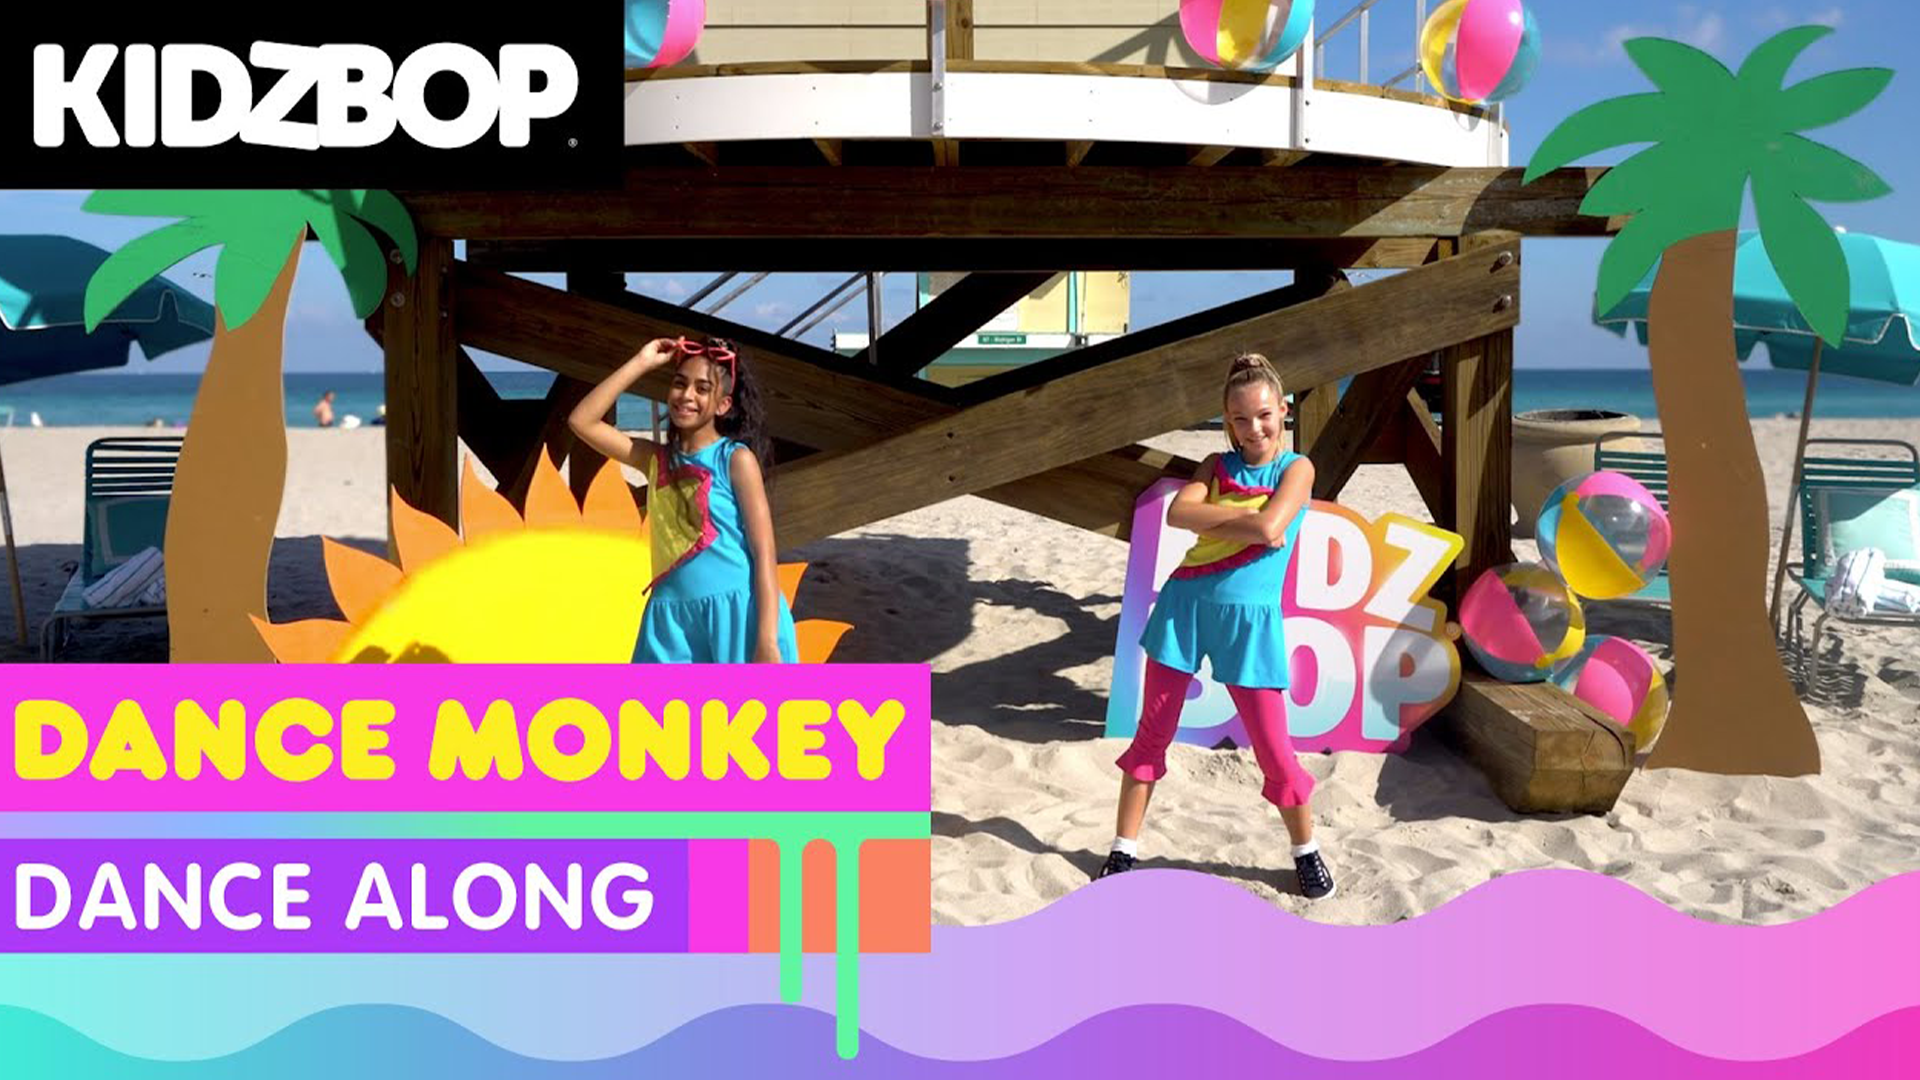 You should watch the Dance Monkey video! It's impossible not to tap your toes when listening to this classic!